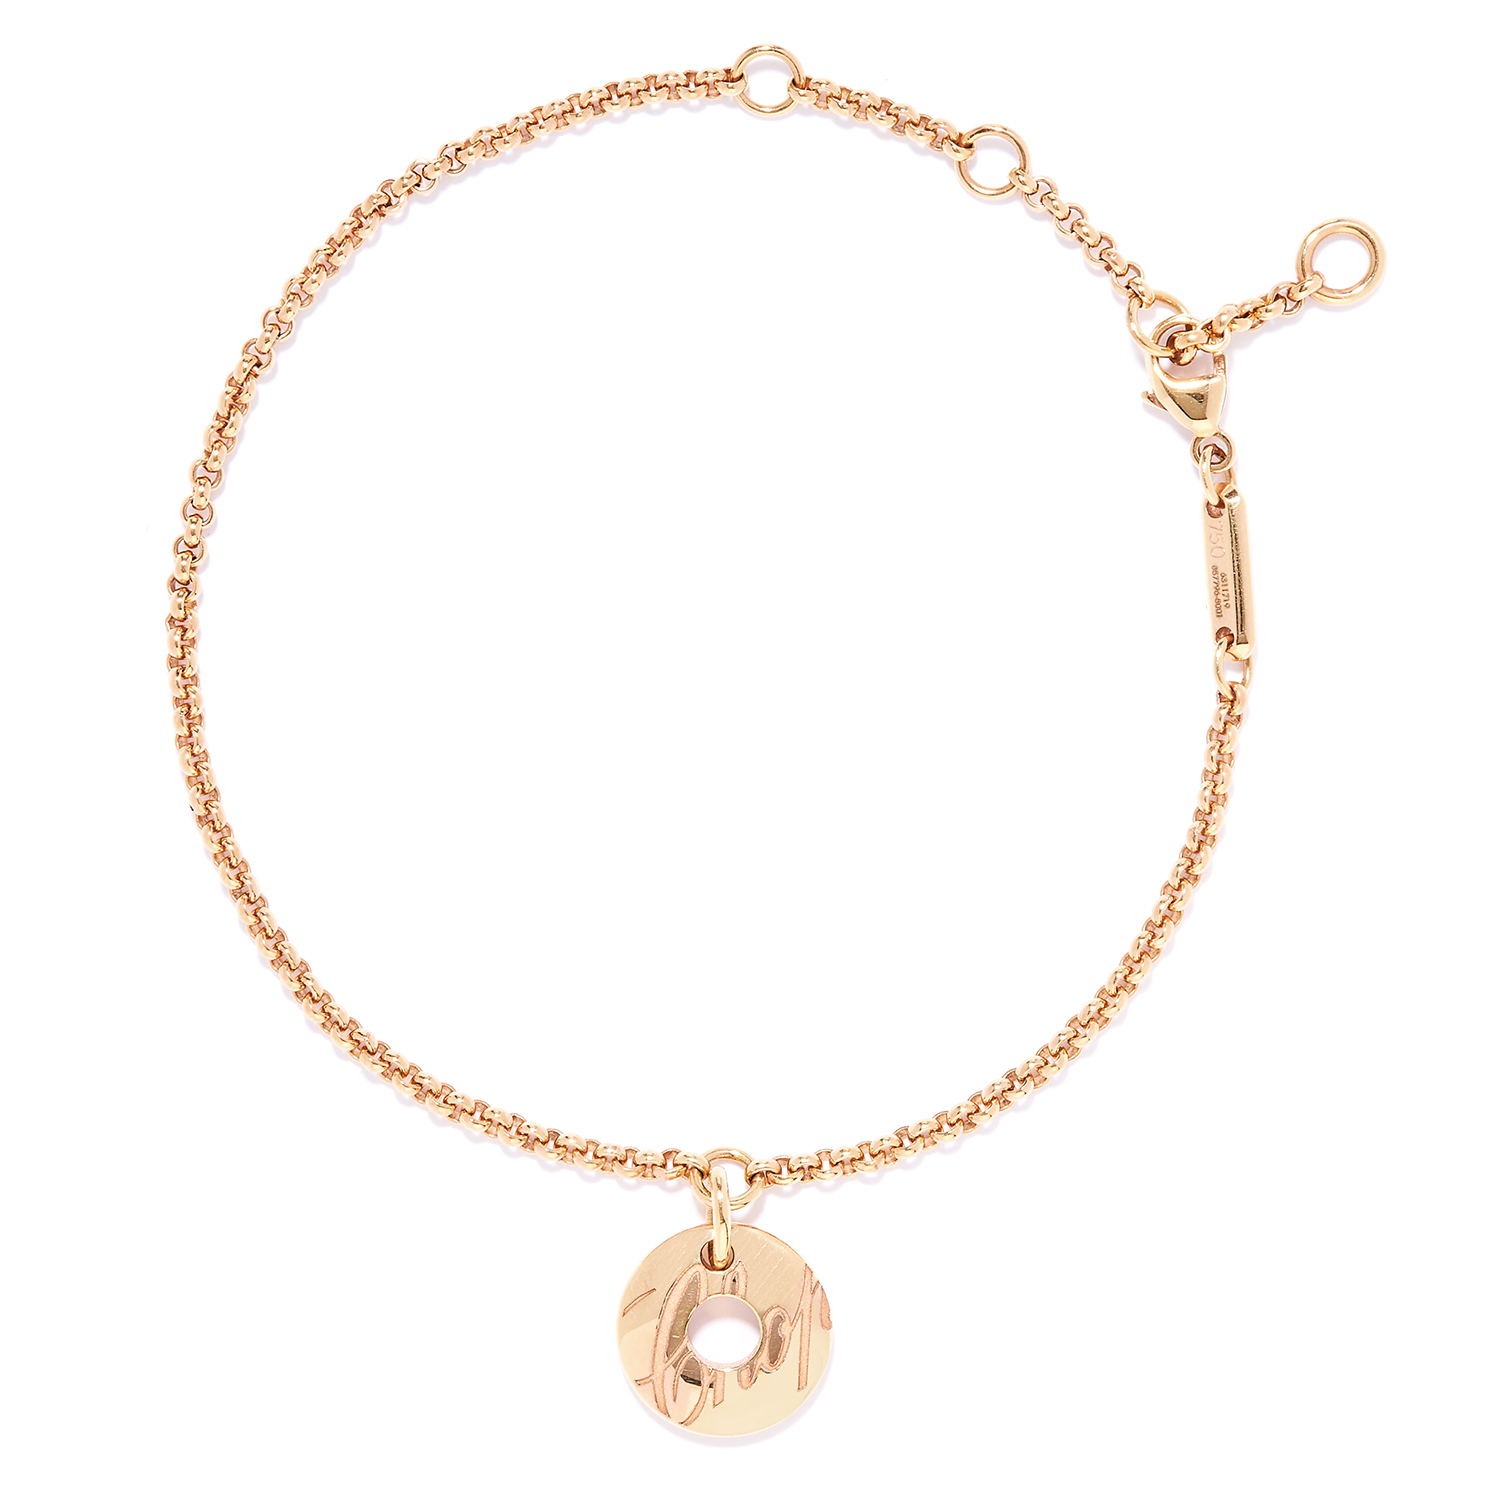 'CHOPARDISSIMO' BRACELET, CHOPARD in 18ct rose gold, set with ...